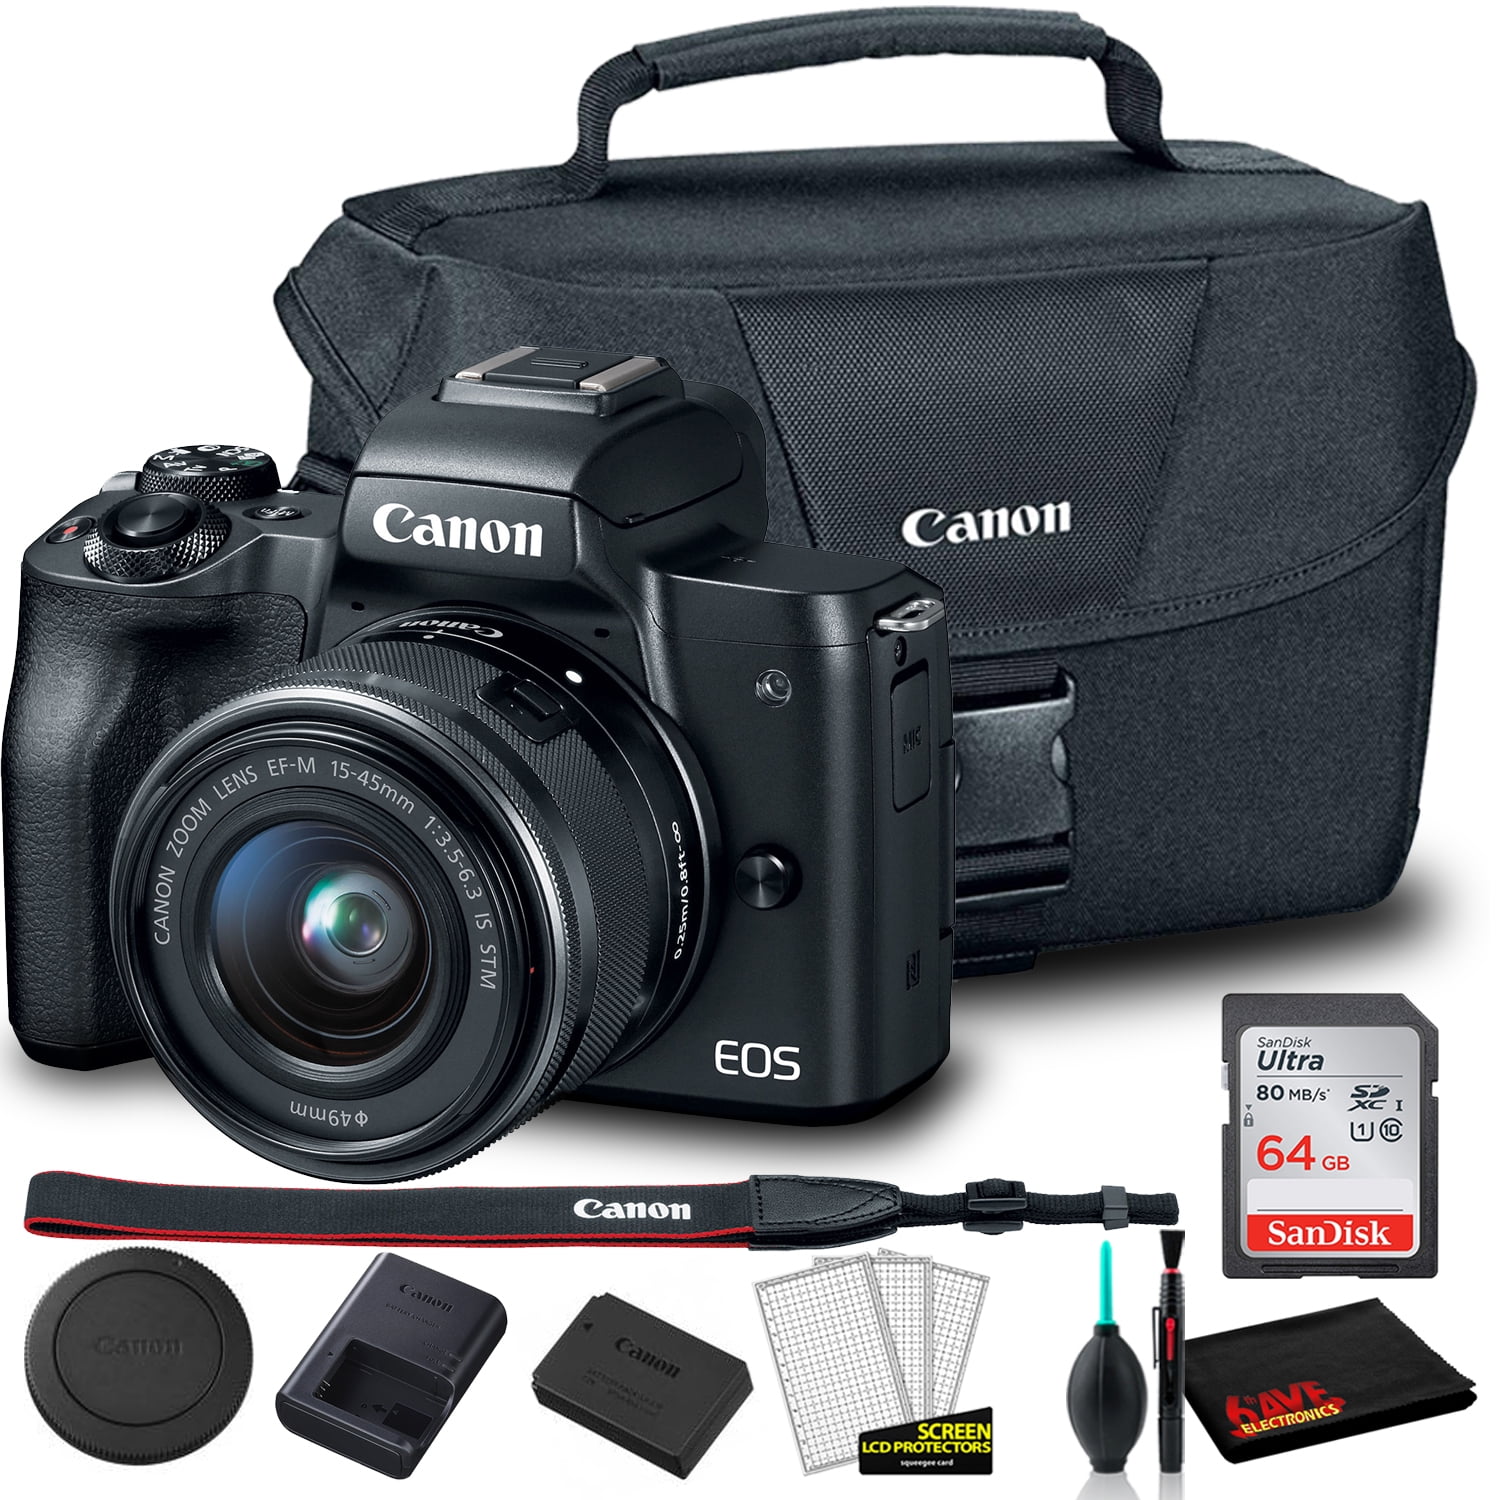  Canon EOS M50 Mirrorless Digital Camera with EF 75-300mm III,  U3 Memory Card and Lens Bundle : Electronics